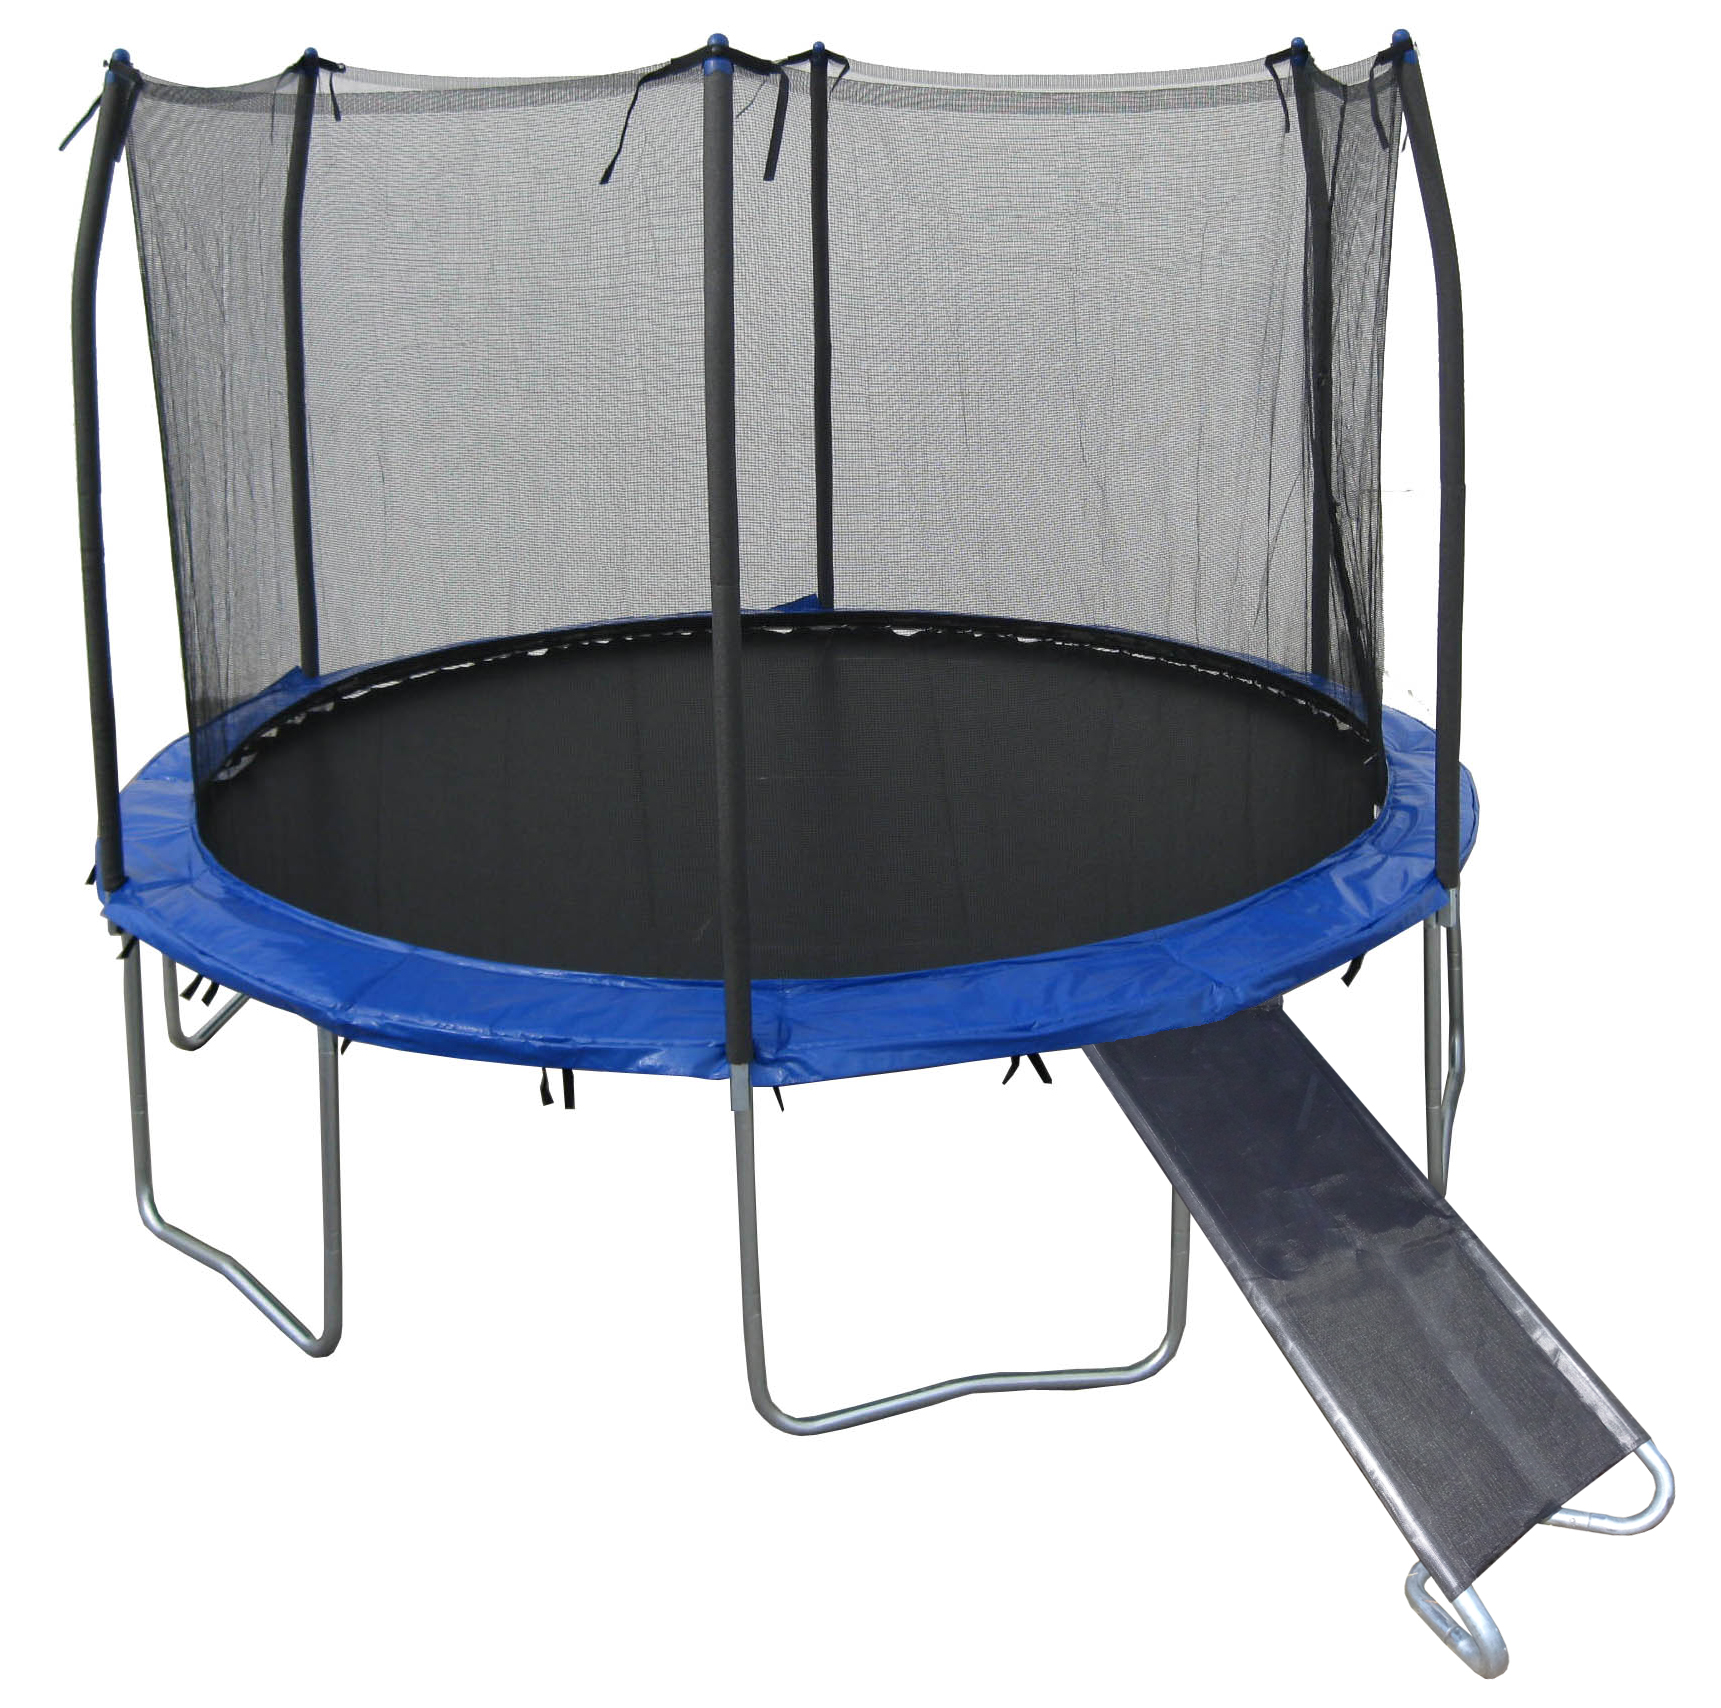 Trampoline Pro Announces The New “Jump Slider” Trampoline Ramp Side, An